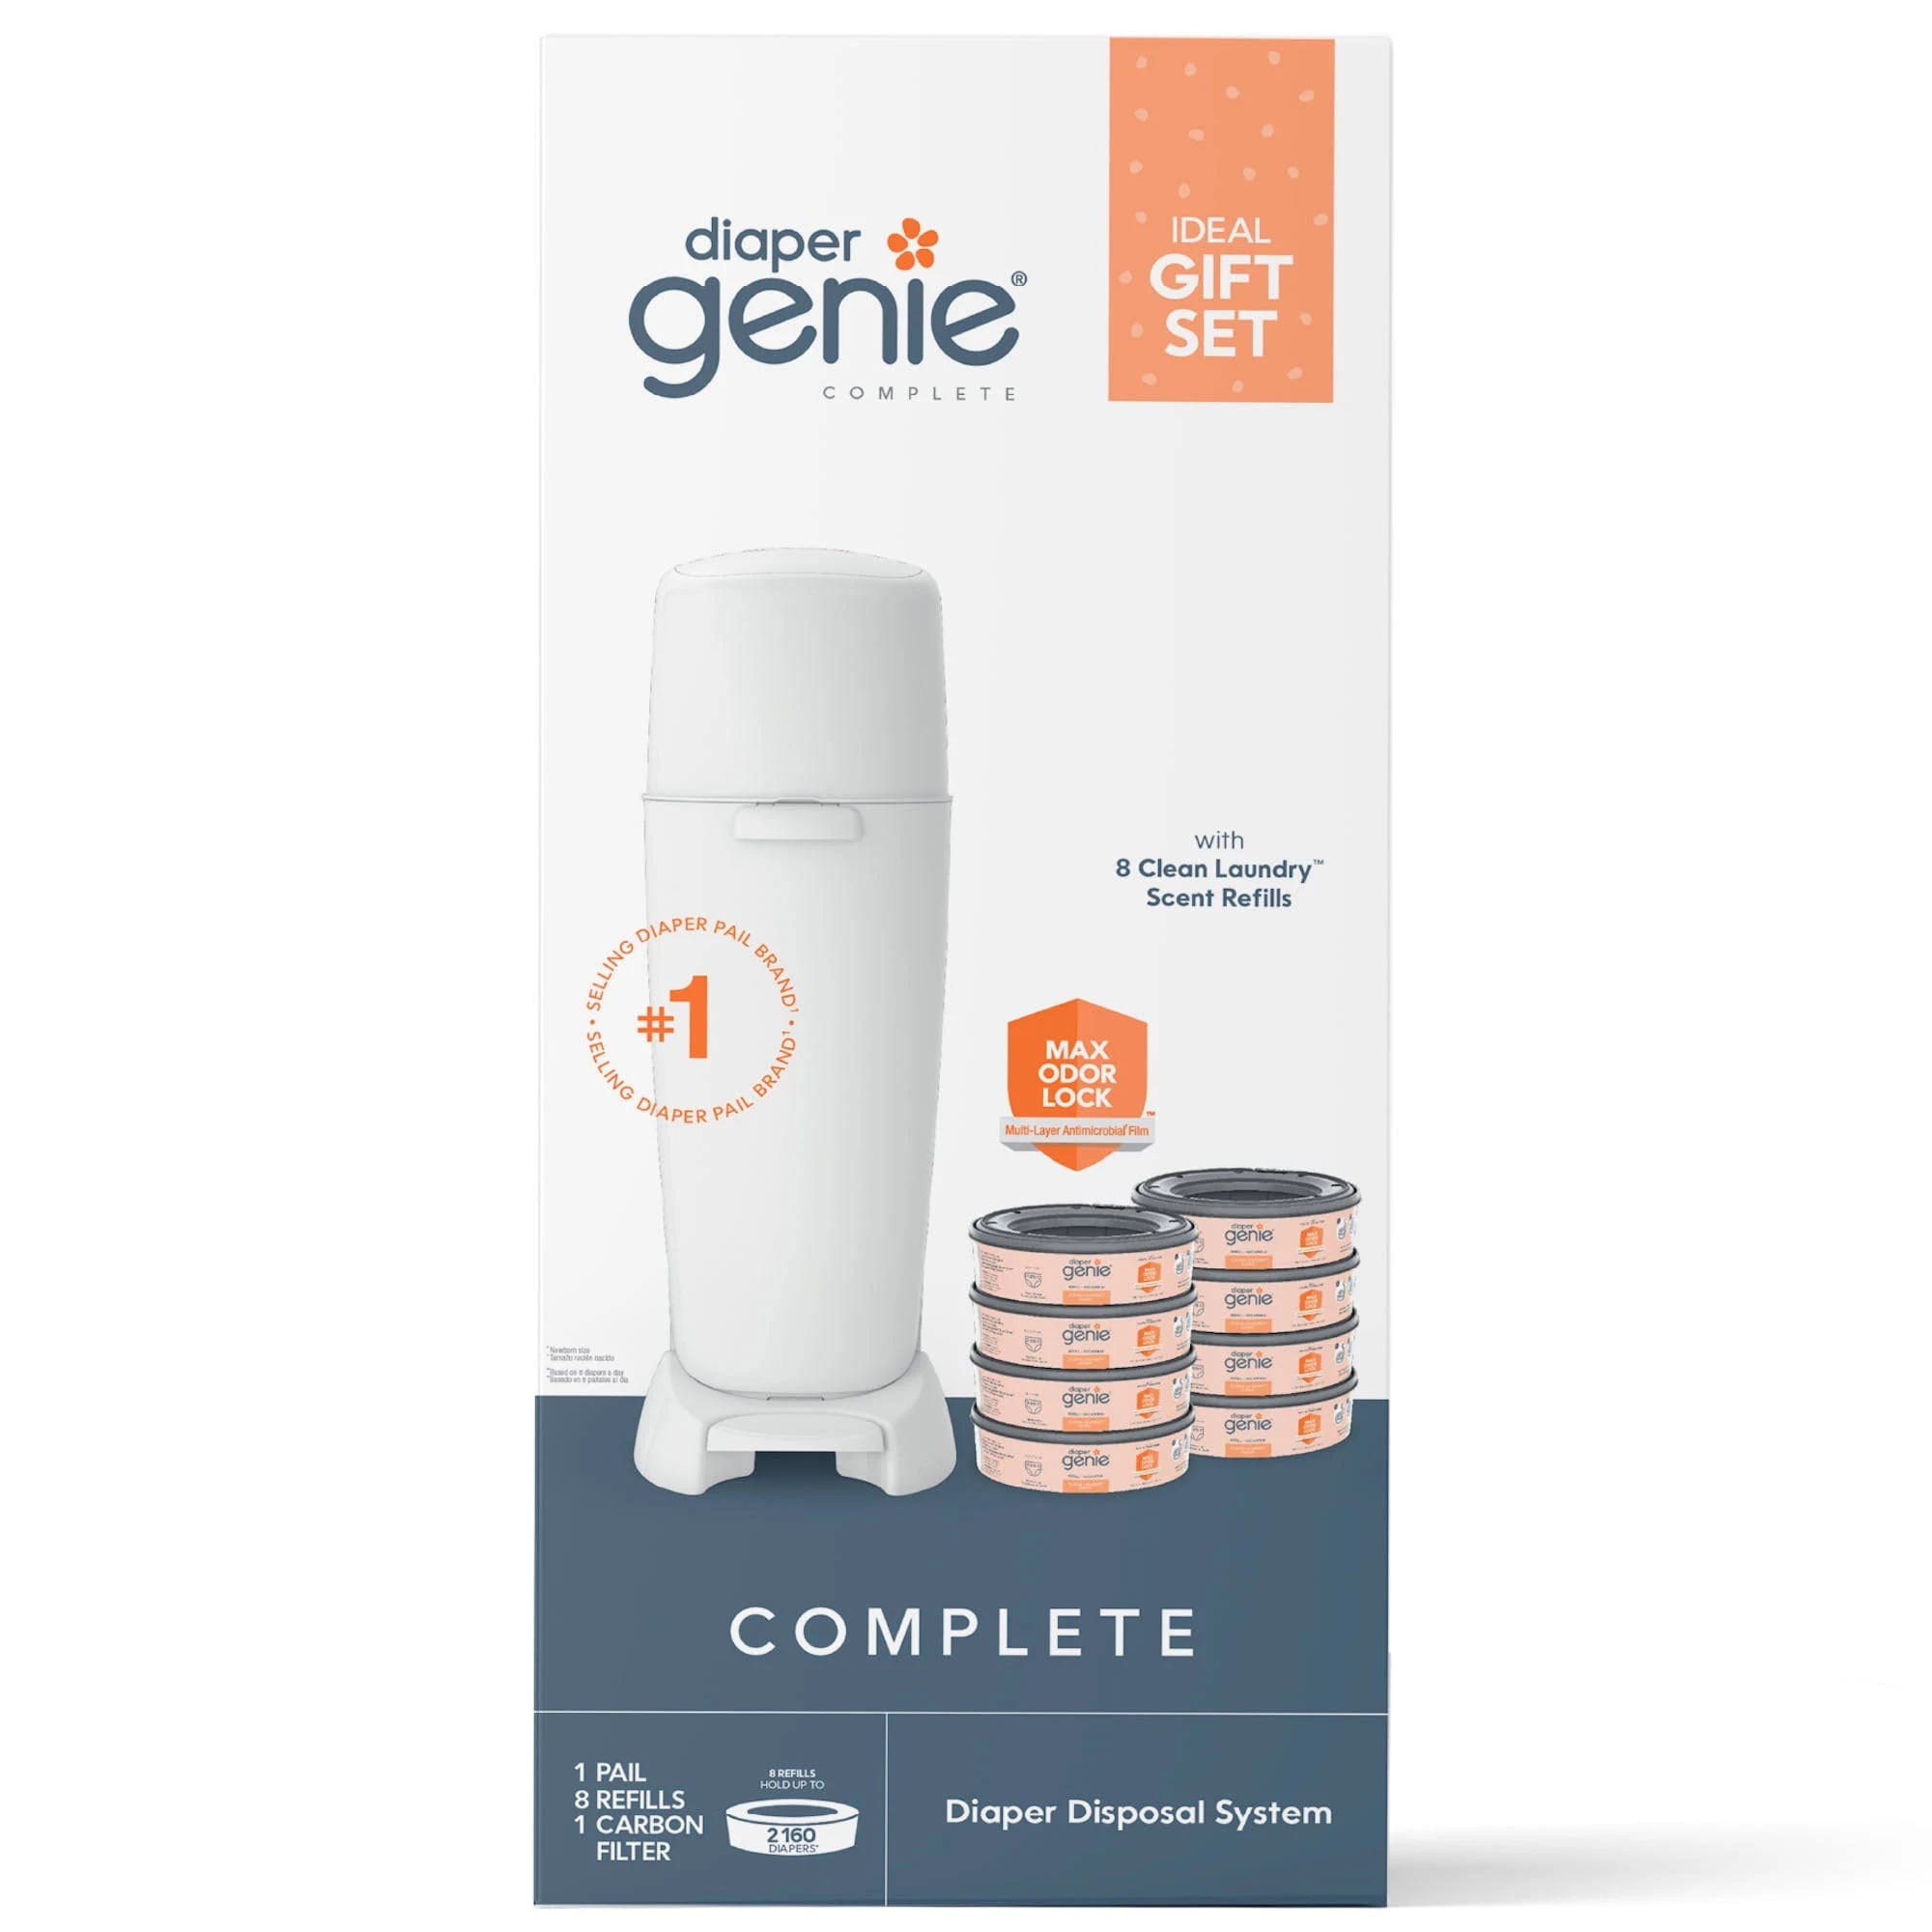 Comprehensive Diaper Genie Gift Set with Pail & Refills | Image